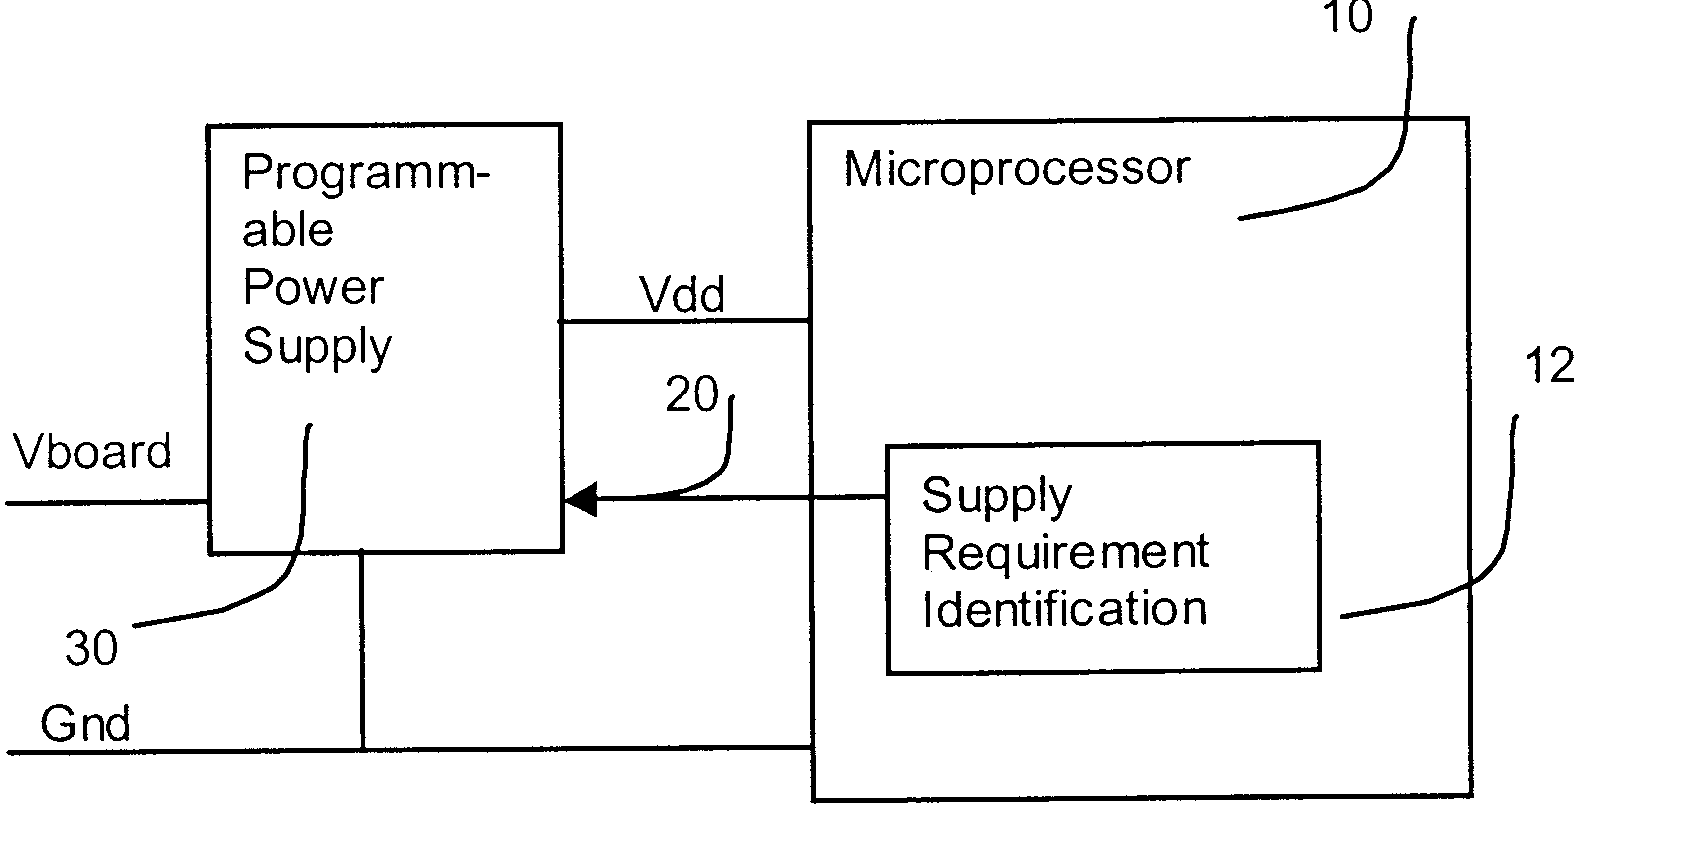 Programmable power supply system